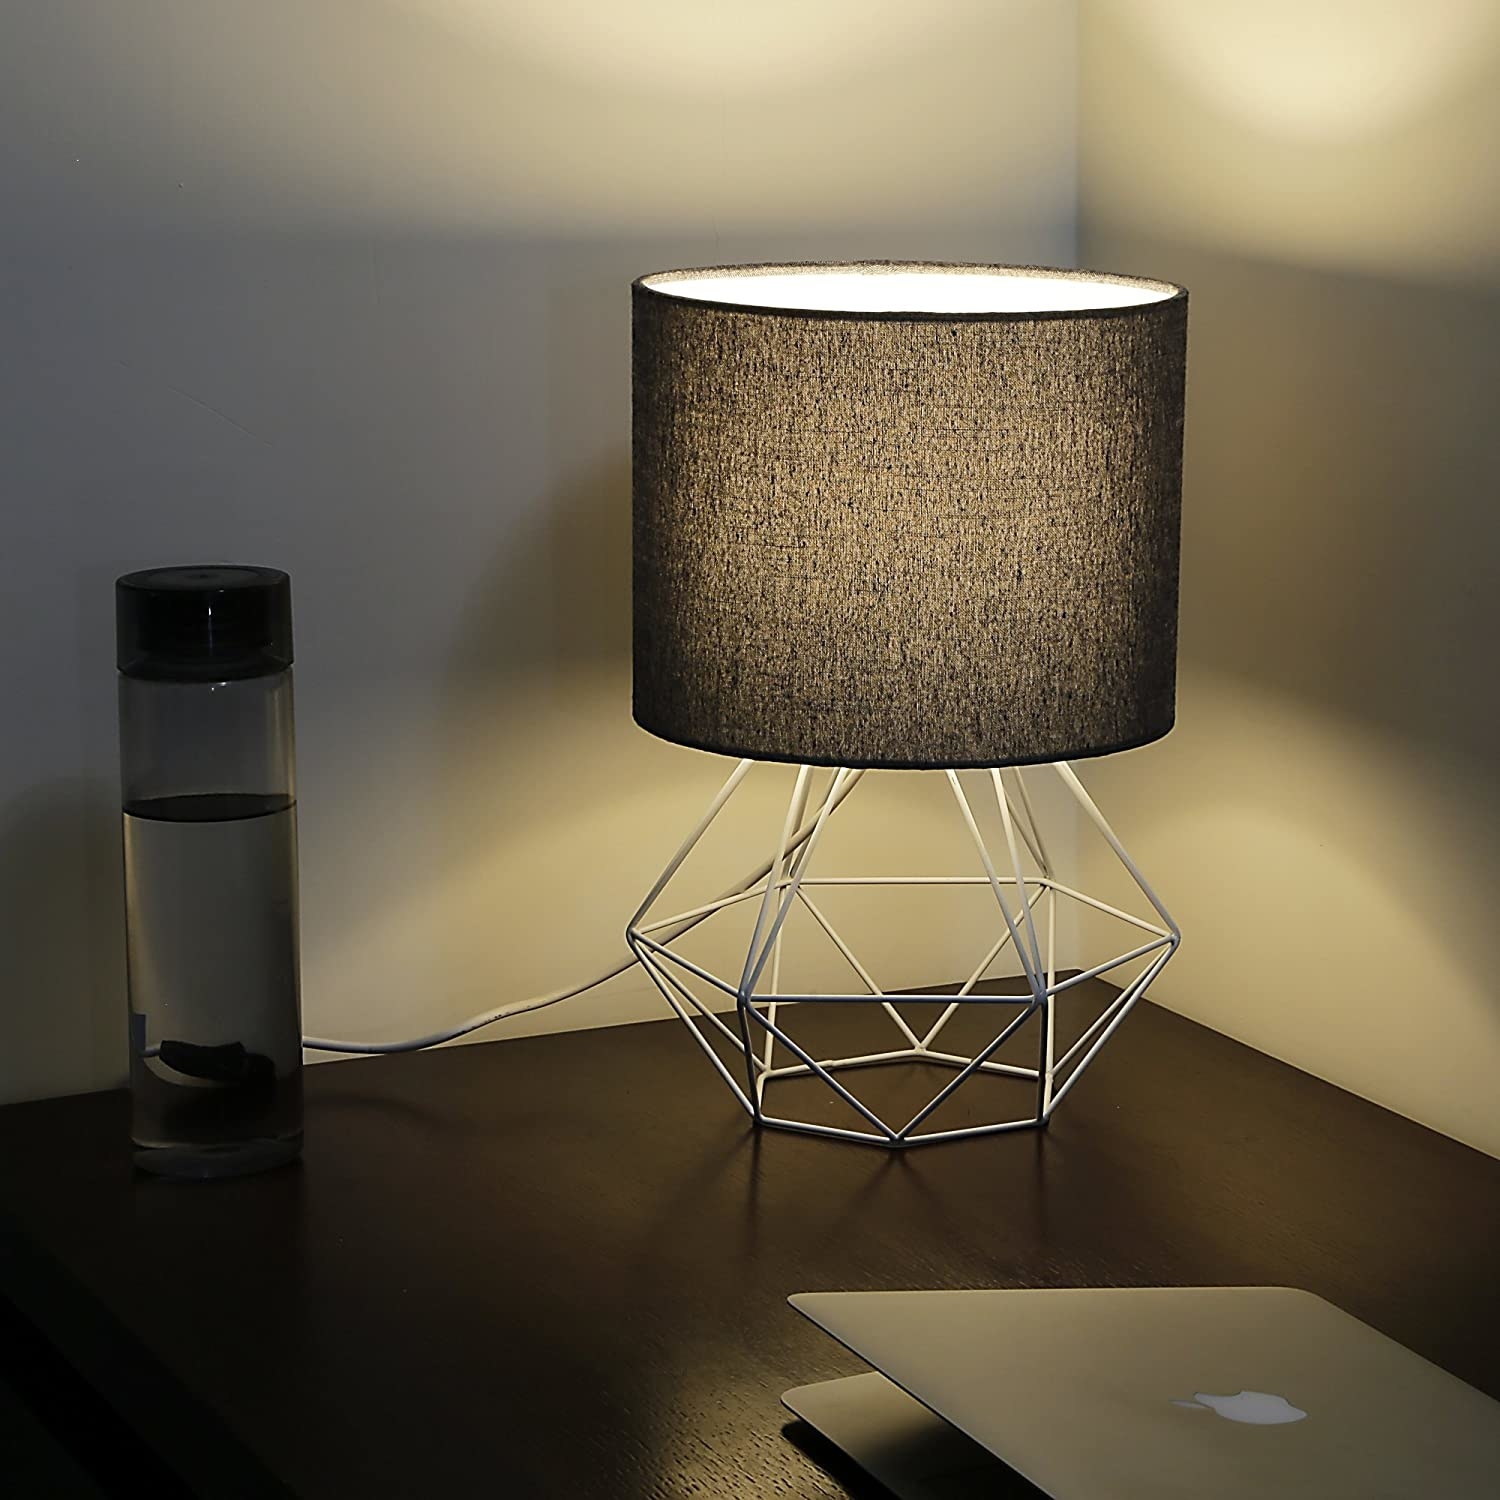 A lamp with a black shade and a geometric, white stand